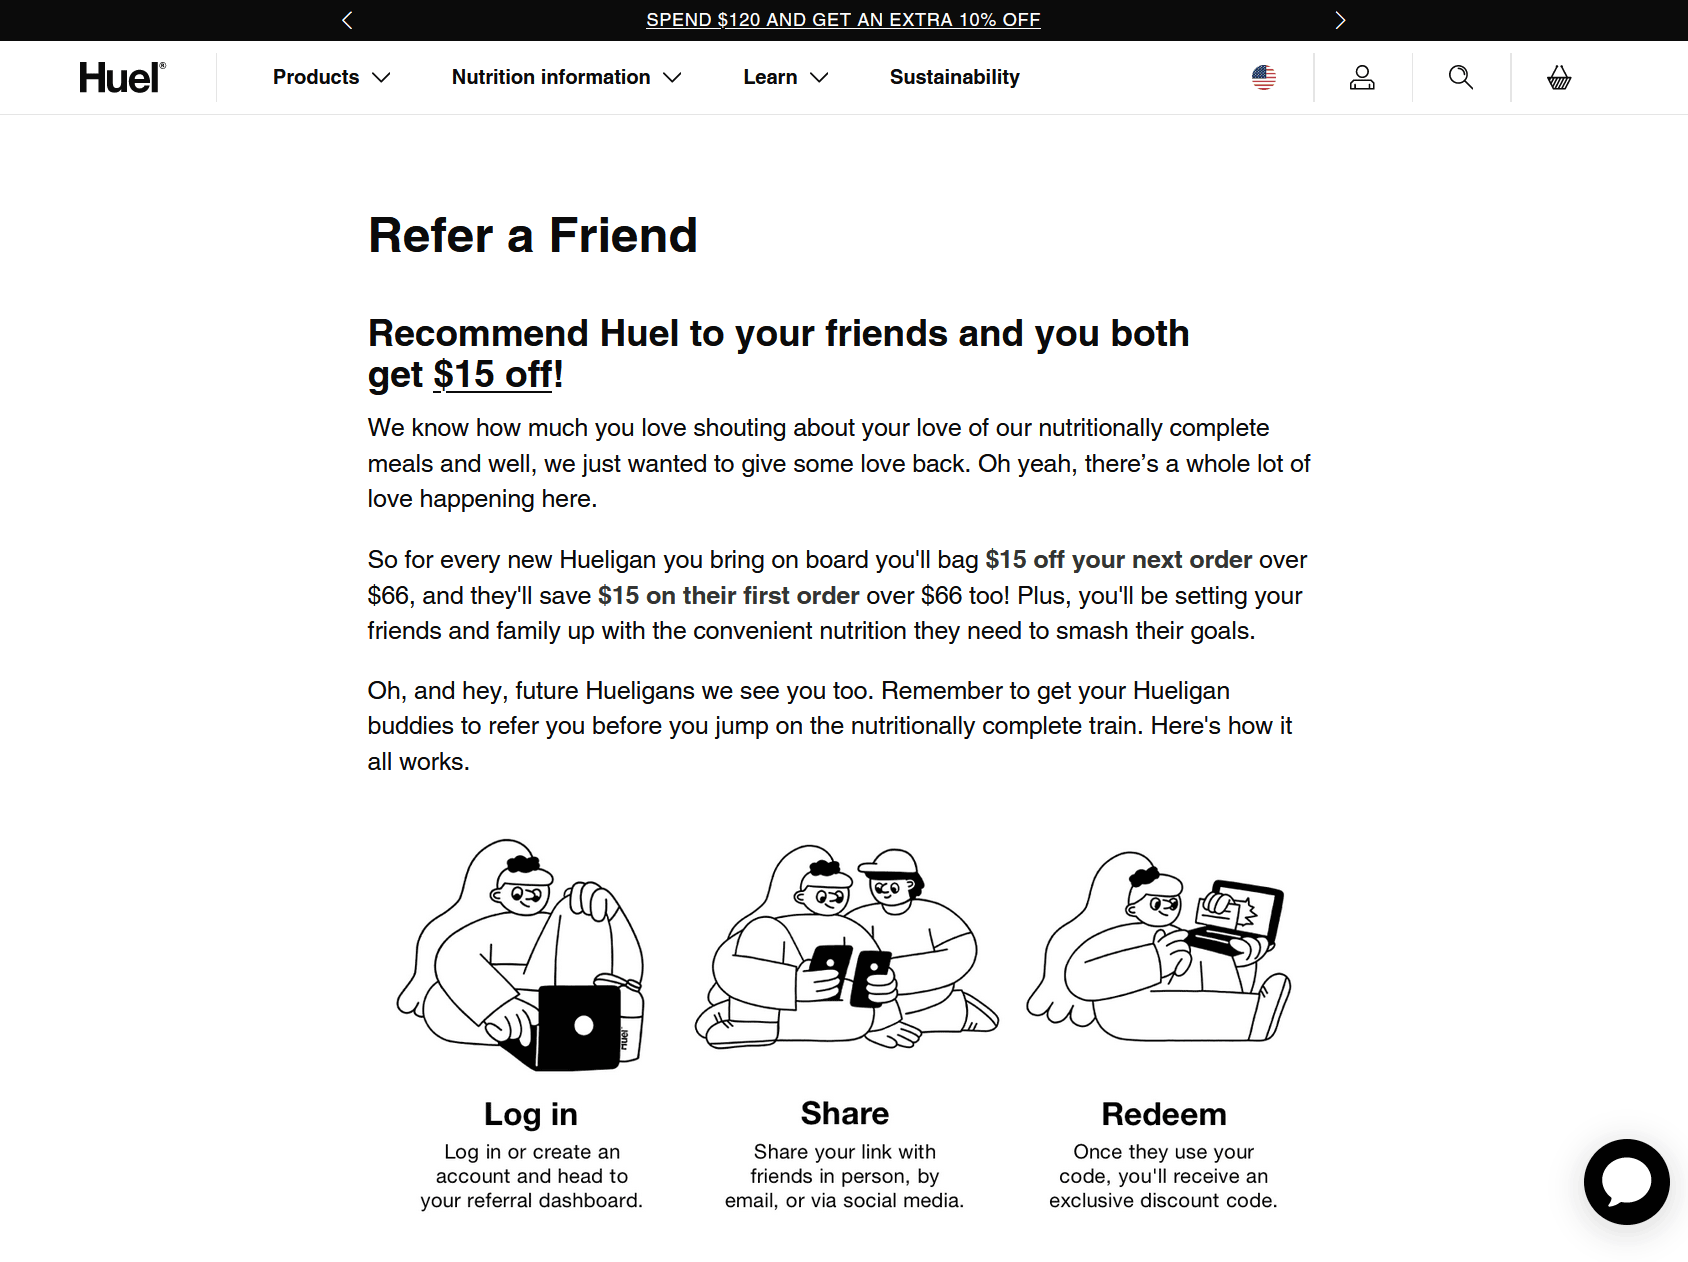 Refer-a-Friend Example